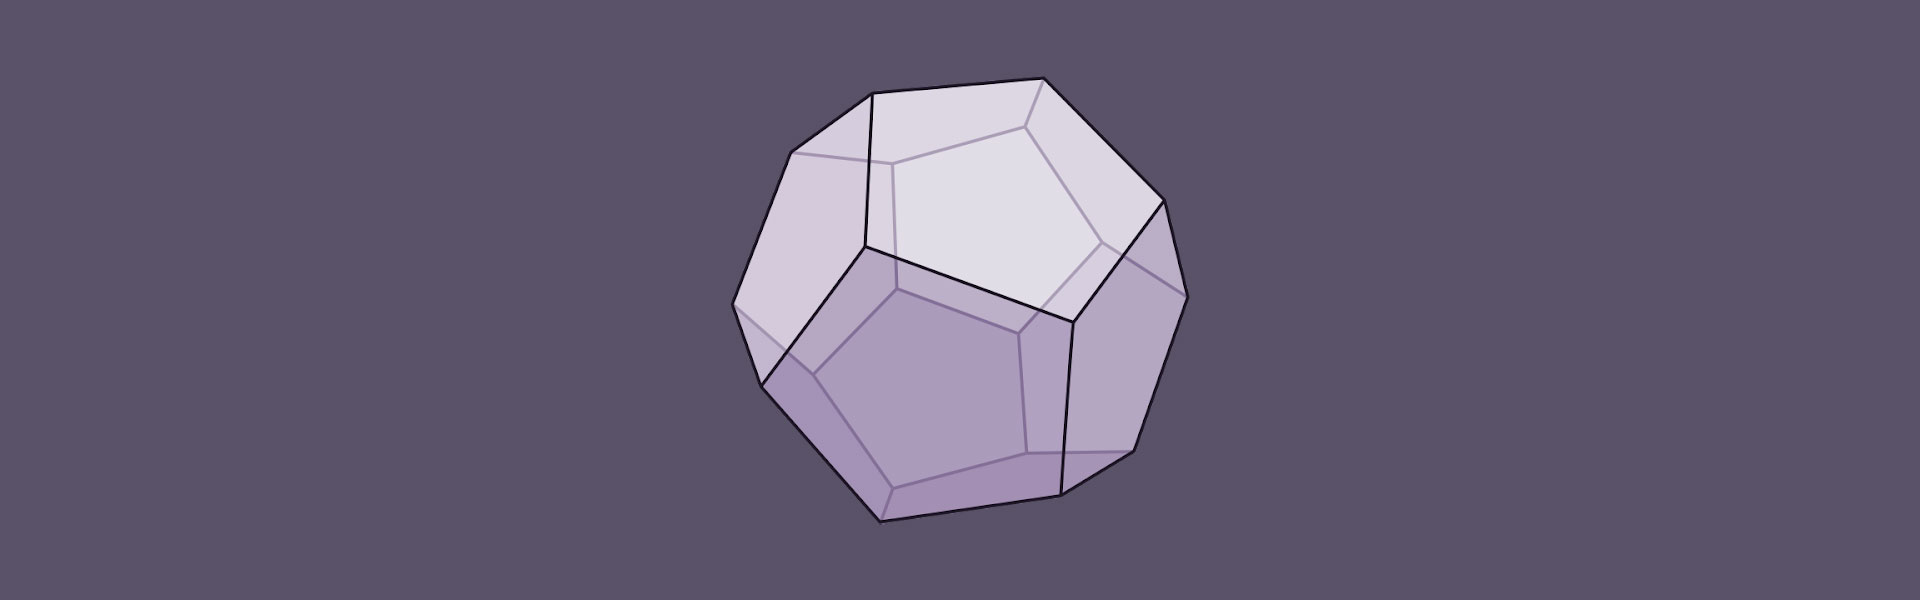 Dodecahedron model.